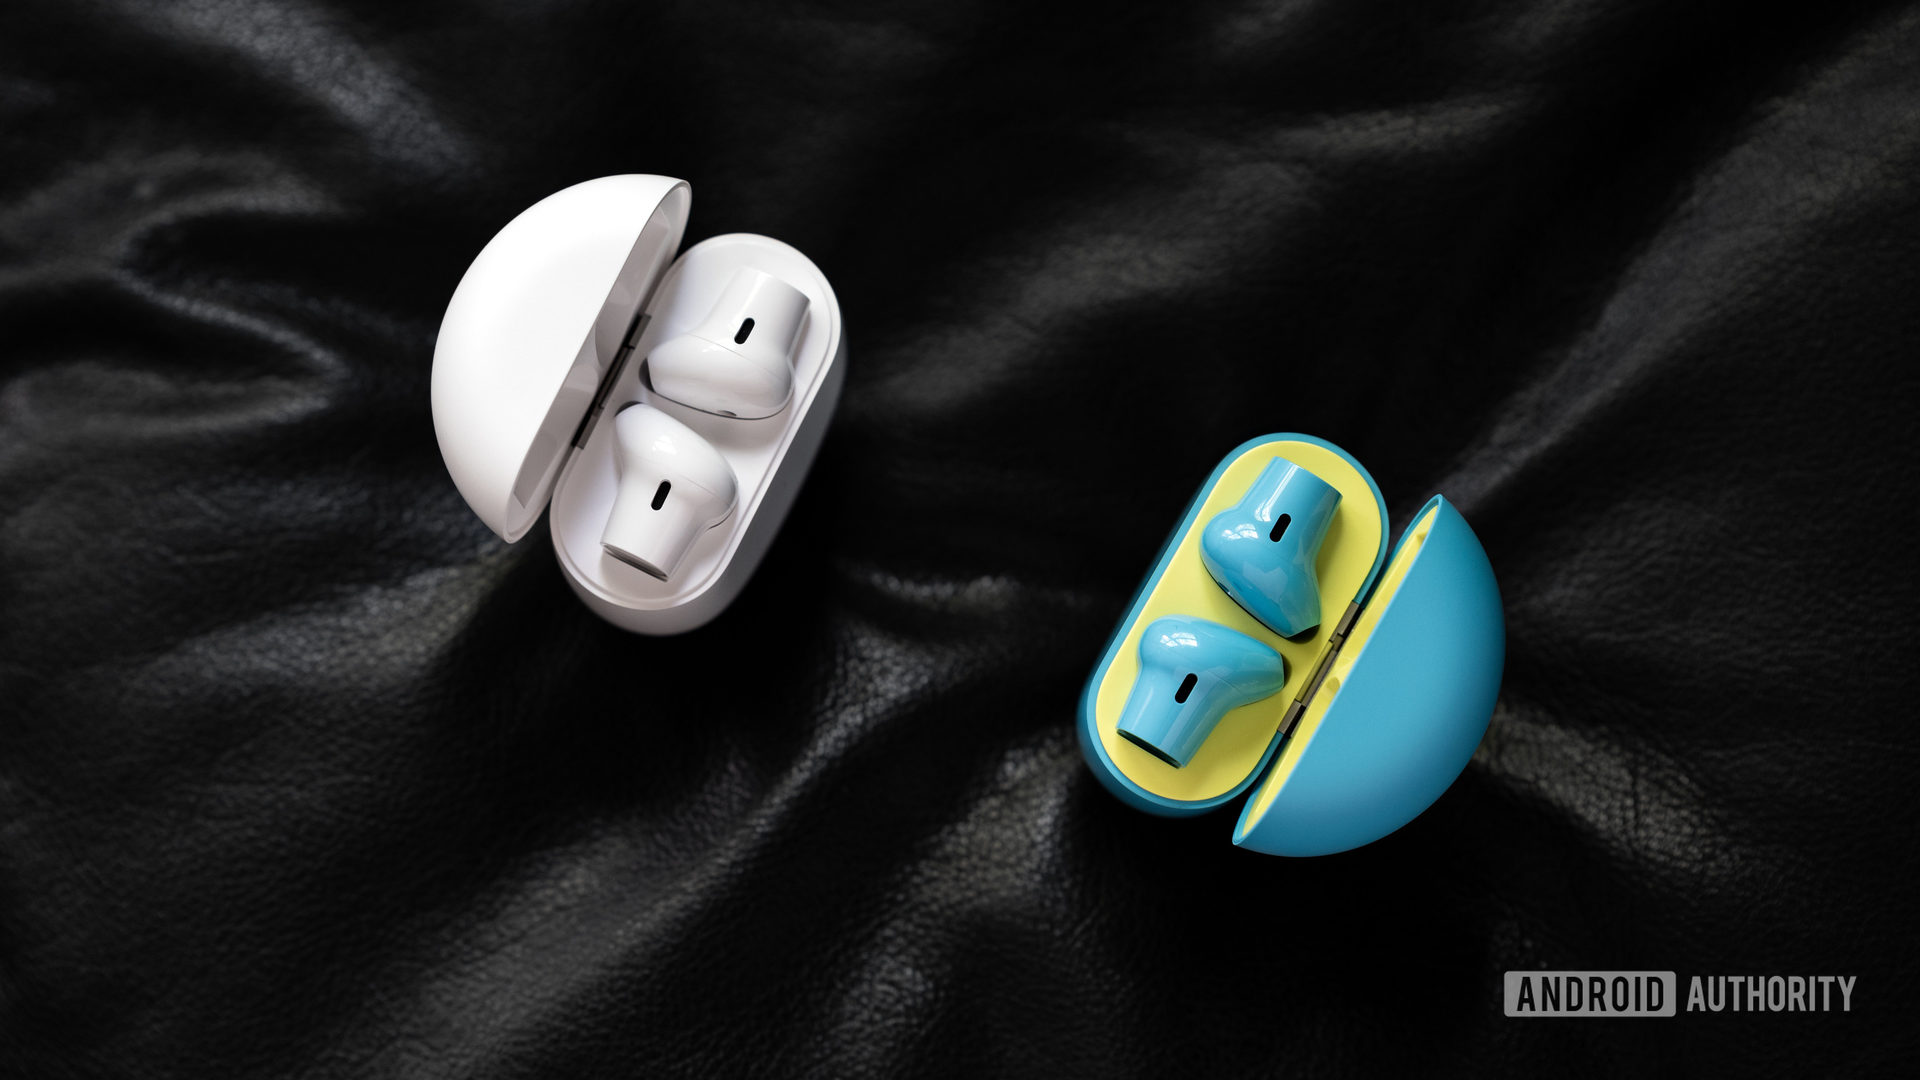 An aerial picture of the OnePlus Buds true wireless earbuds in white and Nord Blue facing each other diagonally with the lids open to reveal the earbuds.